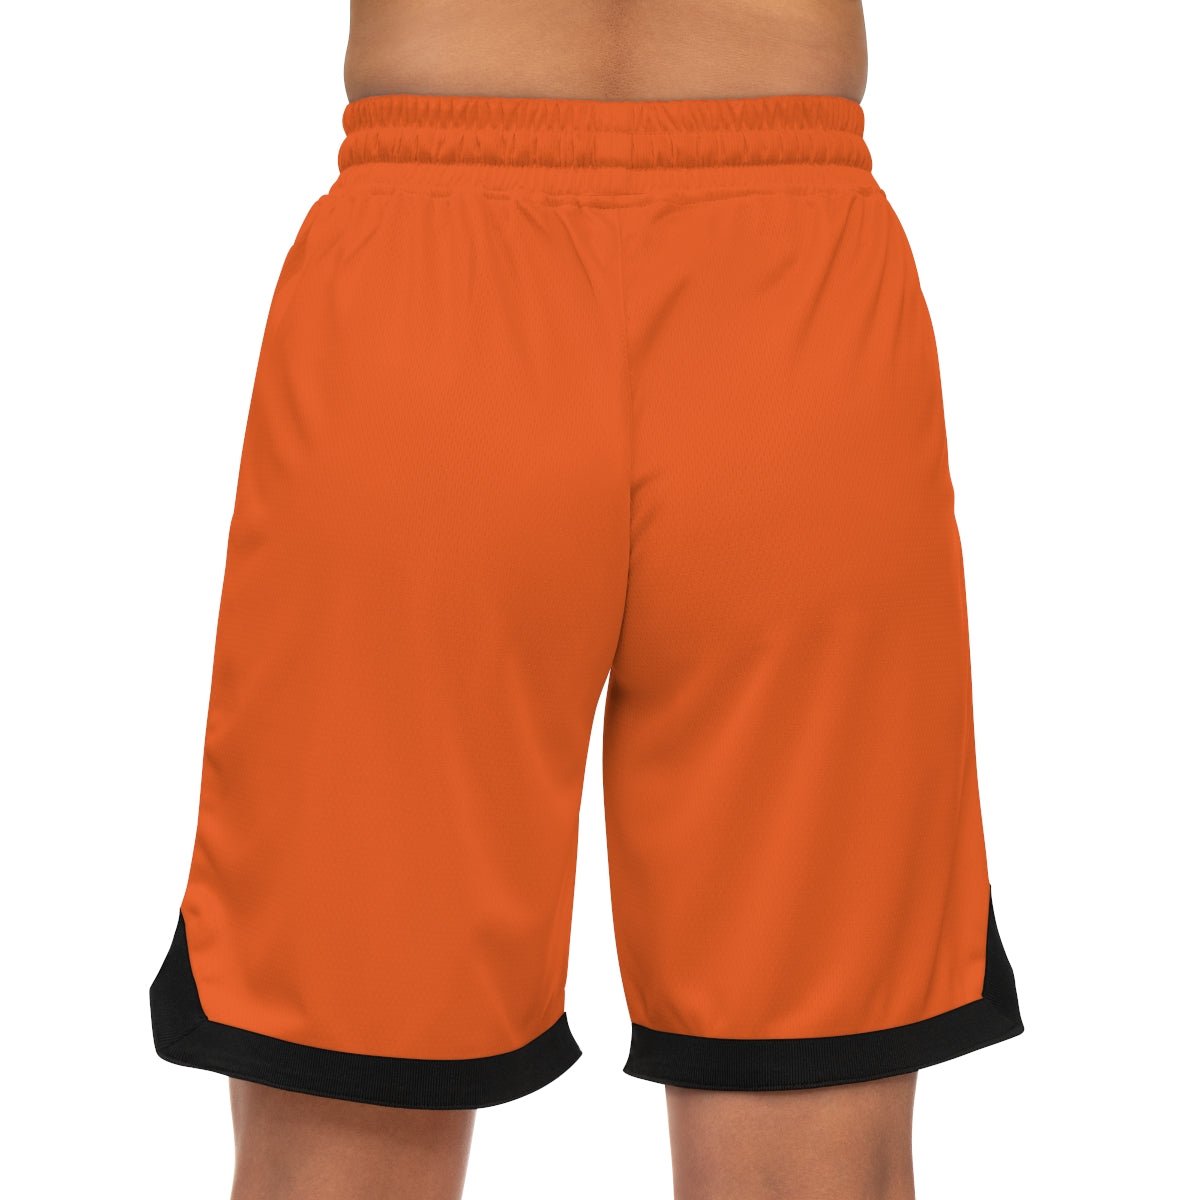 Ninetails Seal Naruto Anime Athletic Shorts w/Pockets - One Punch Fits